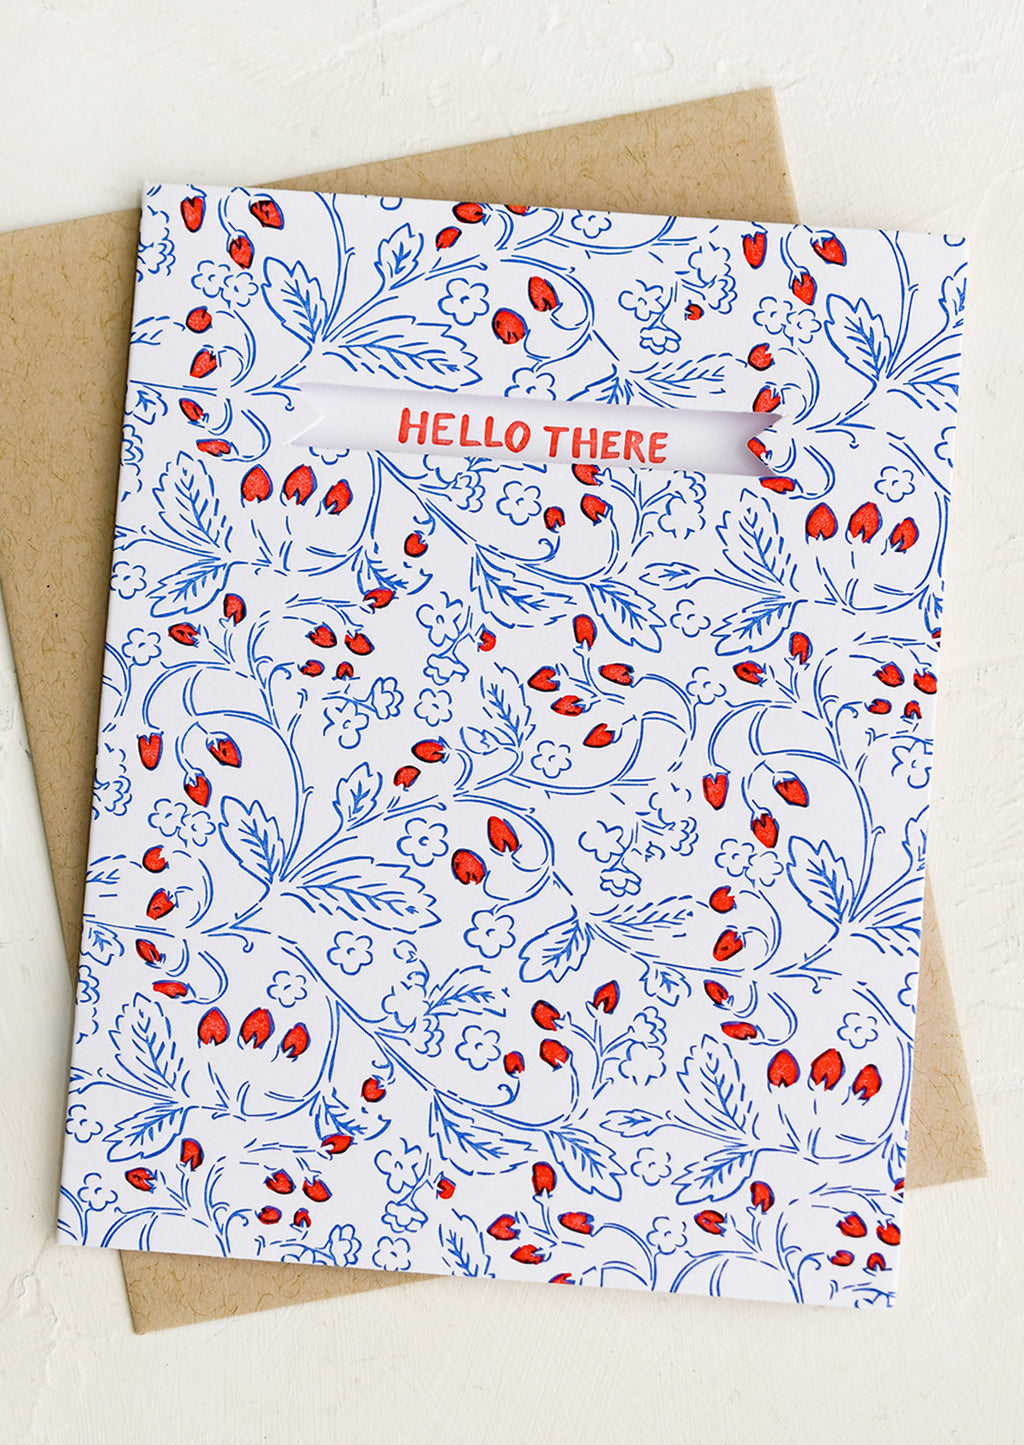 1: A card with blue and red strawberry print and text reading "Hello there".